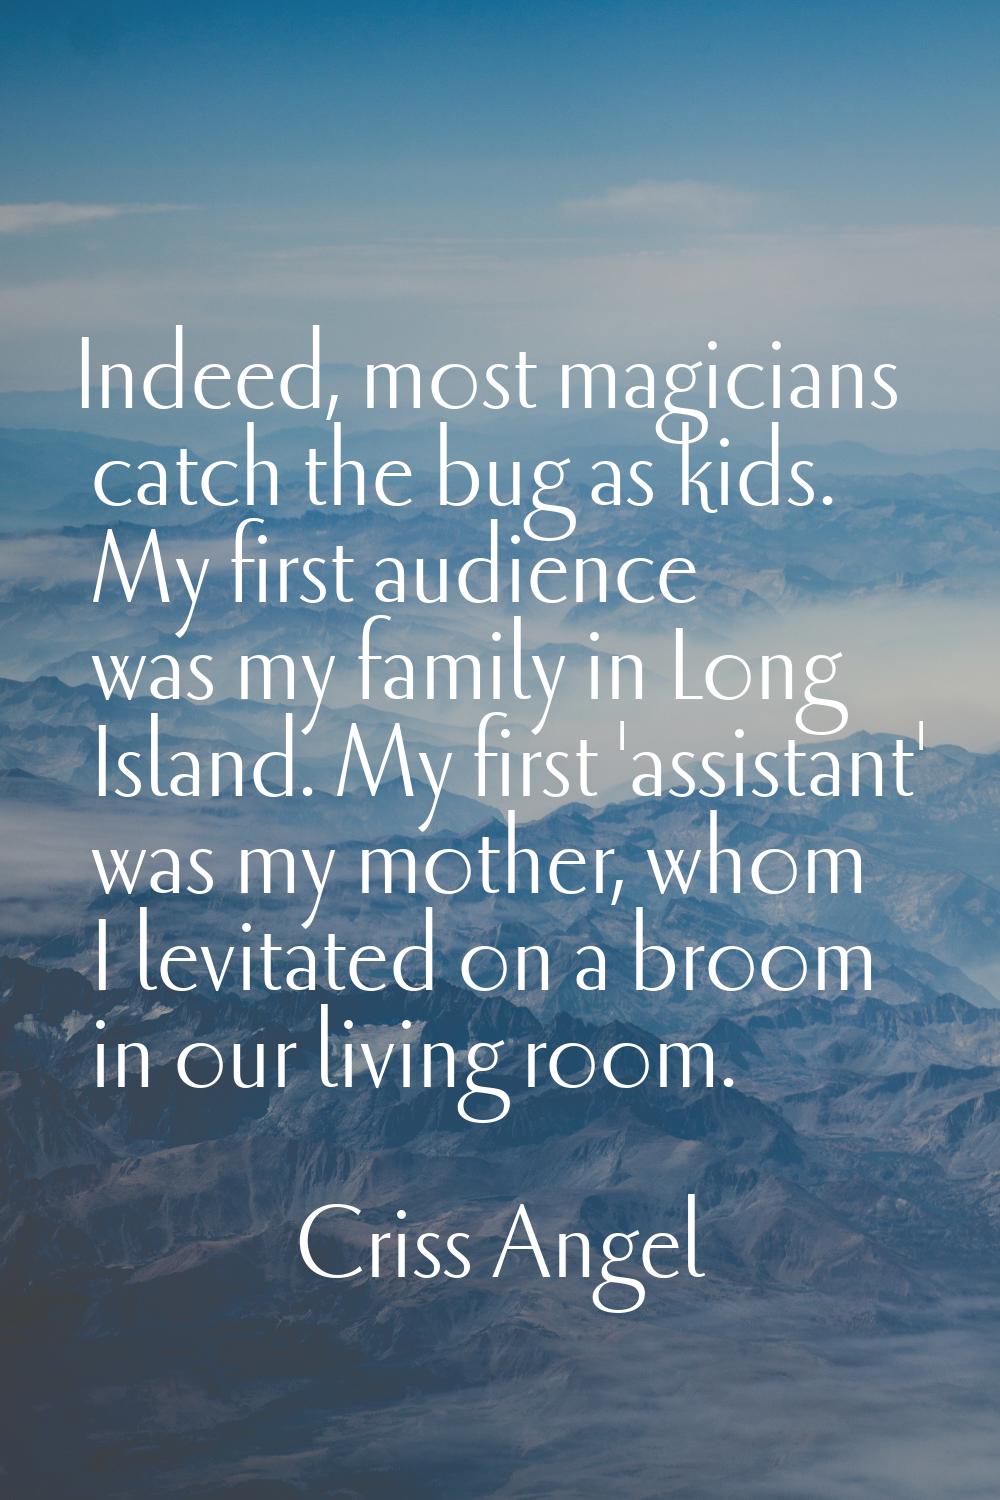 Indeed, most magicians catch the bug as kids. My first audience was my family in Long Island. My fi